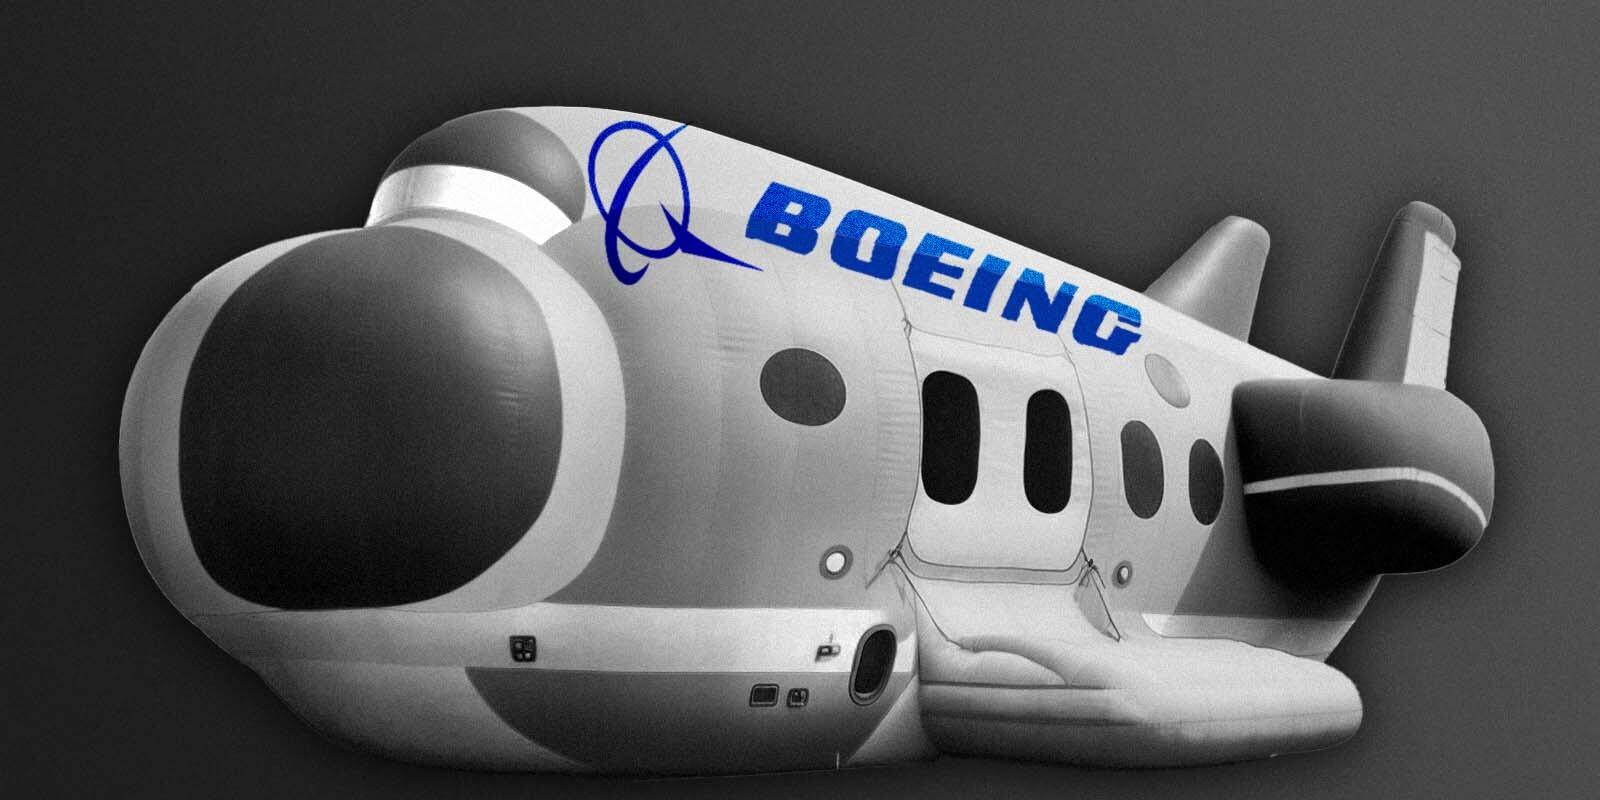 Boeing Might Be Bouncing Back